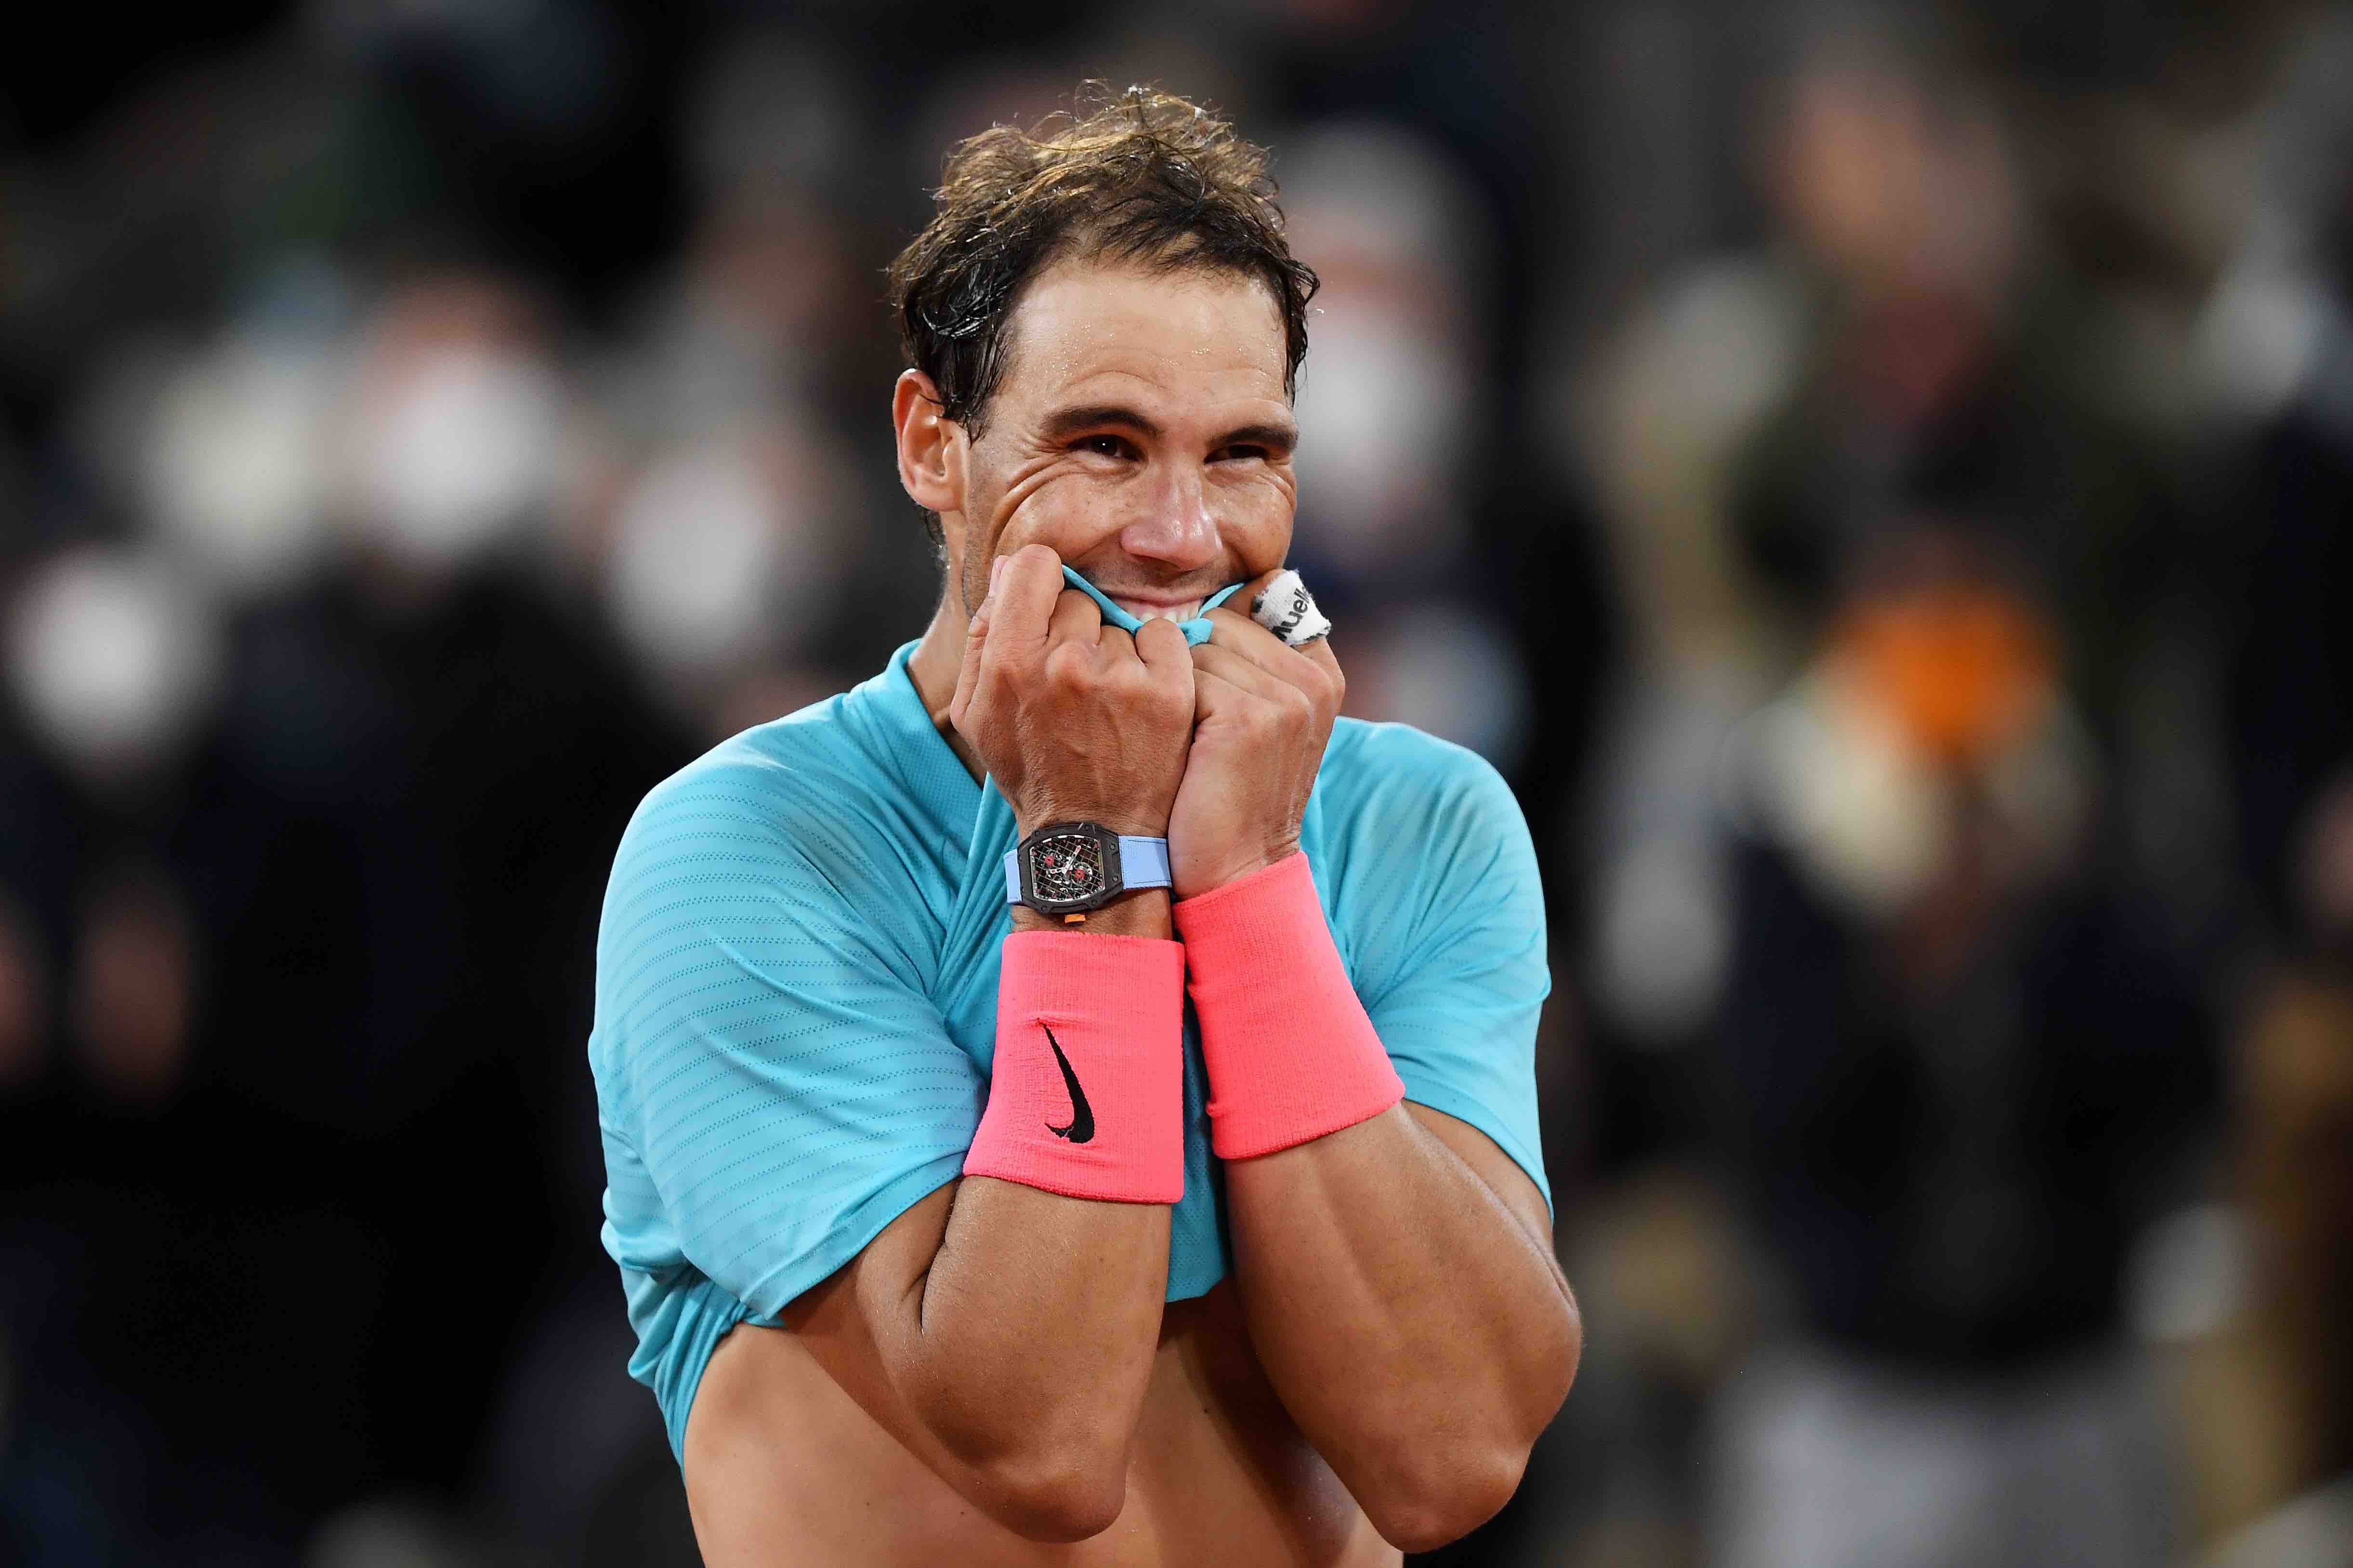 Rafael Nadal moments after his championship-winning shot. The RM 27-04 is on his right wrist. (Photo by Shaun Botterill/Getty Images)